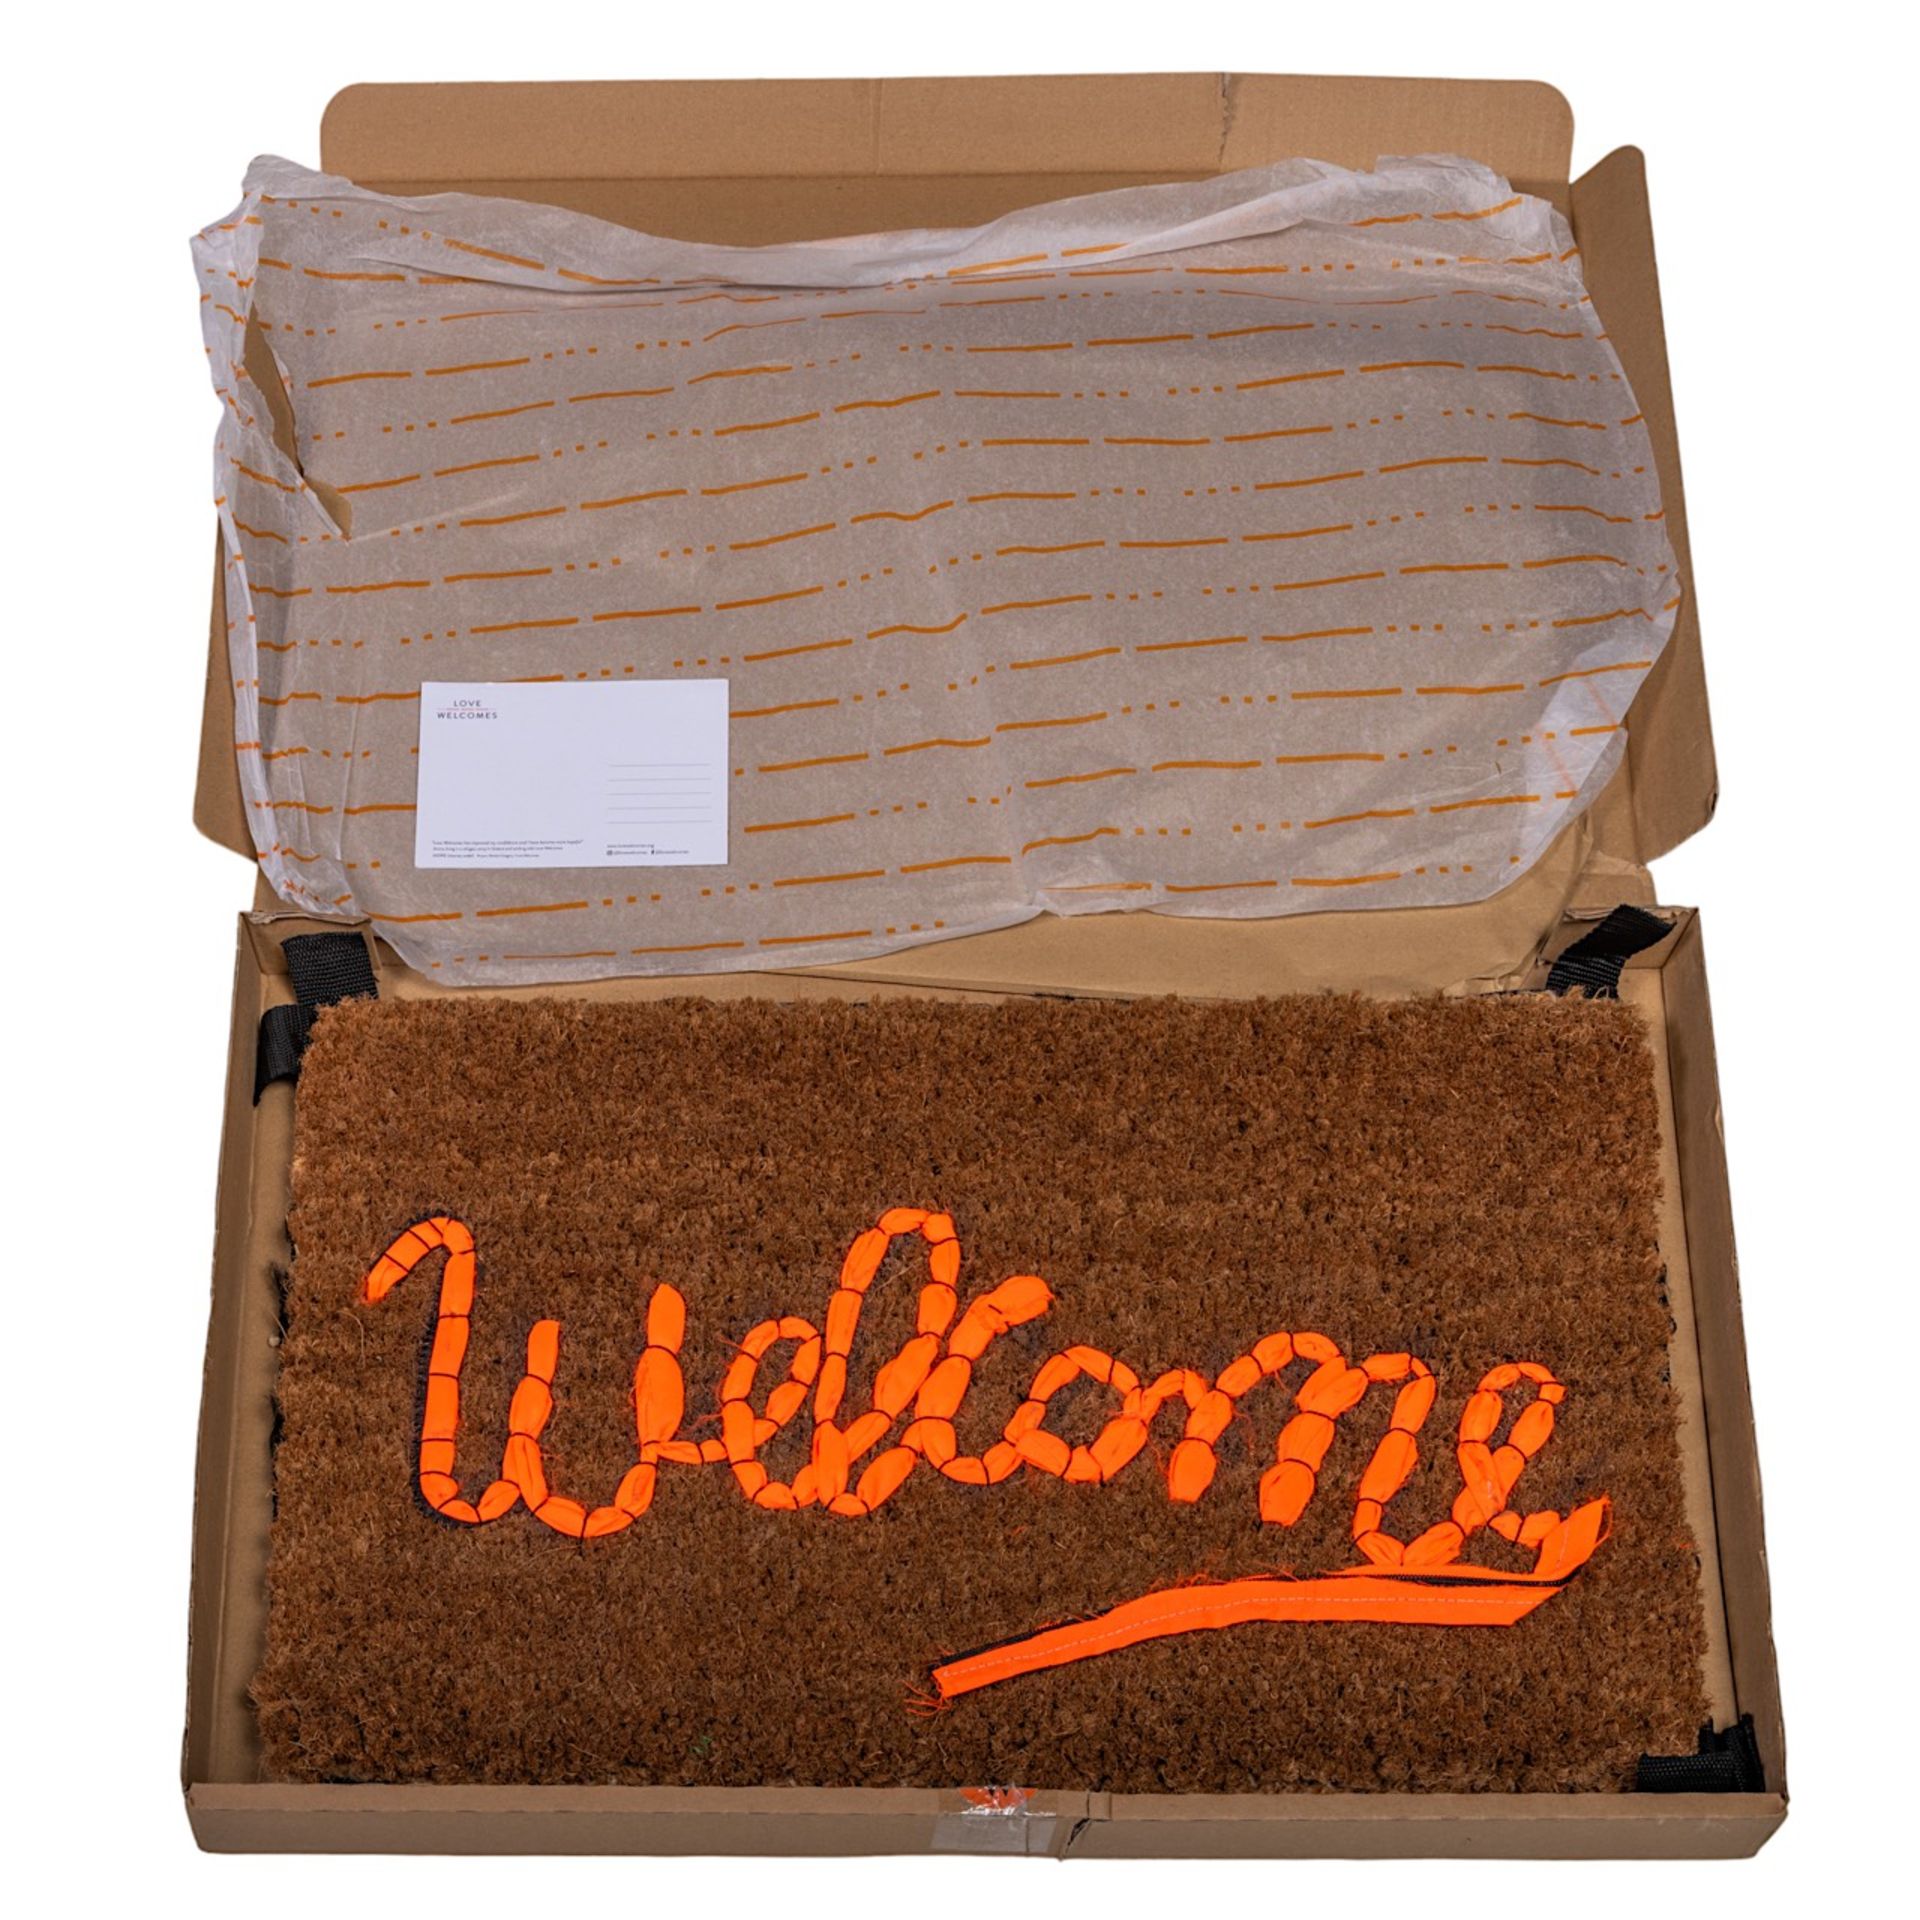 Banksy (1974), Welcome mat, edition by 'Gross Domestic Product', Ndeg 2316 40 x 60 cm. (15 3/4 x 23. - Bild 5 aus 7